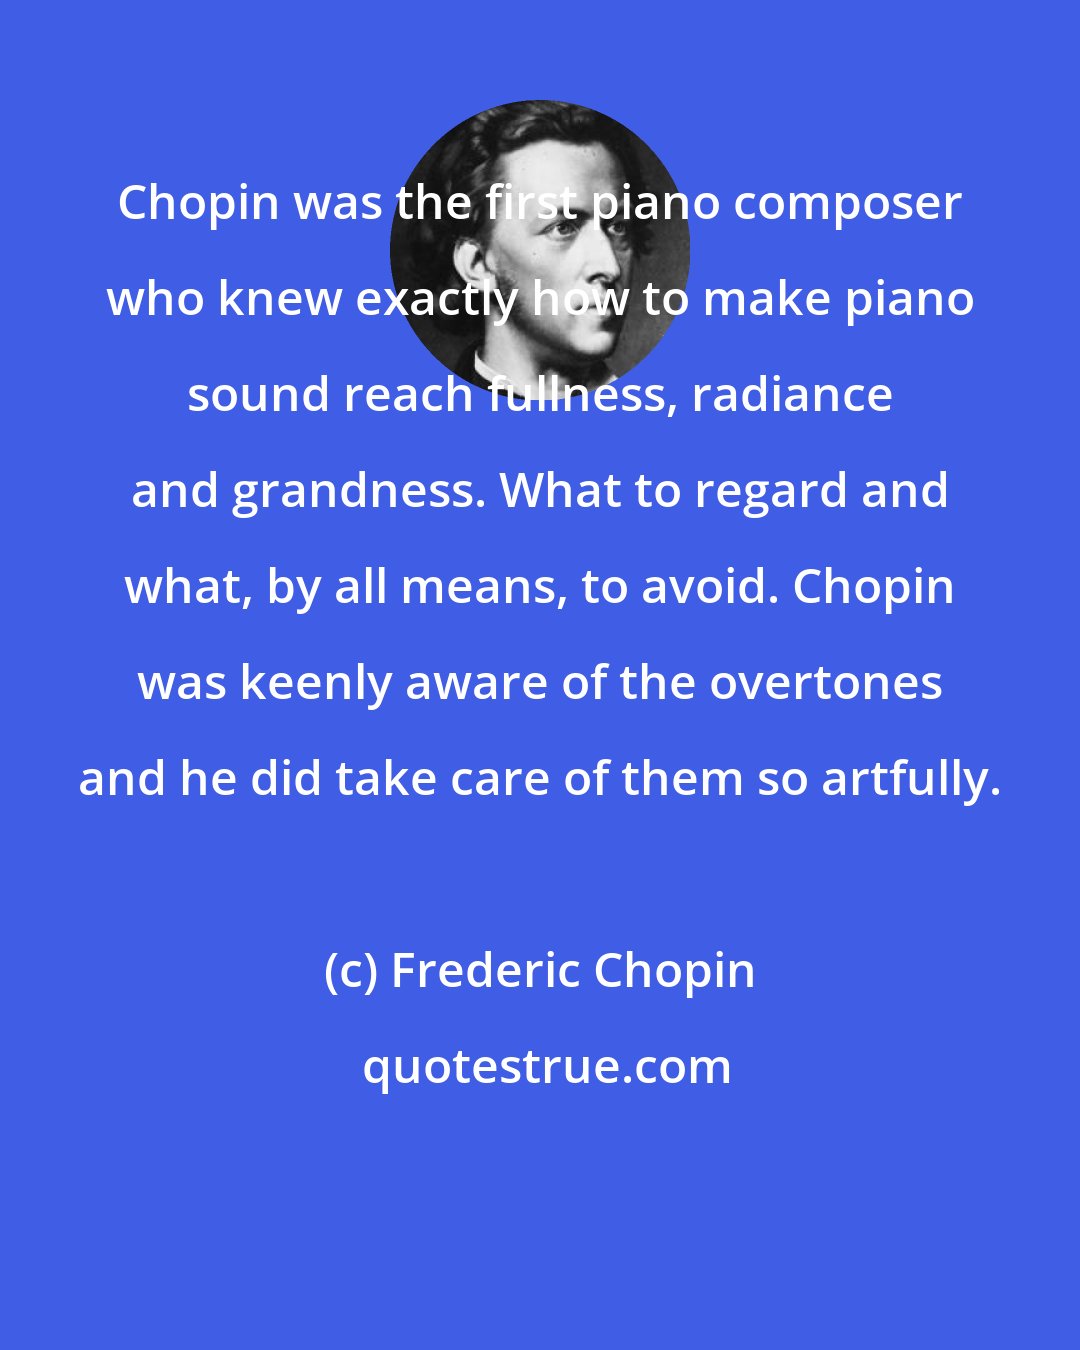 Frederic Chopin: Chopin was the first piano composer who knew exactly how to make piano sound reach fullness, radiance and grandness. What to regard and what, by all means, to avoid. Chopin was keenly aware of the overtones and he did take care of them so artfully.